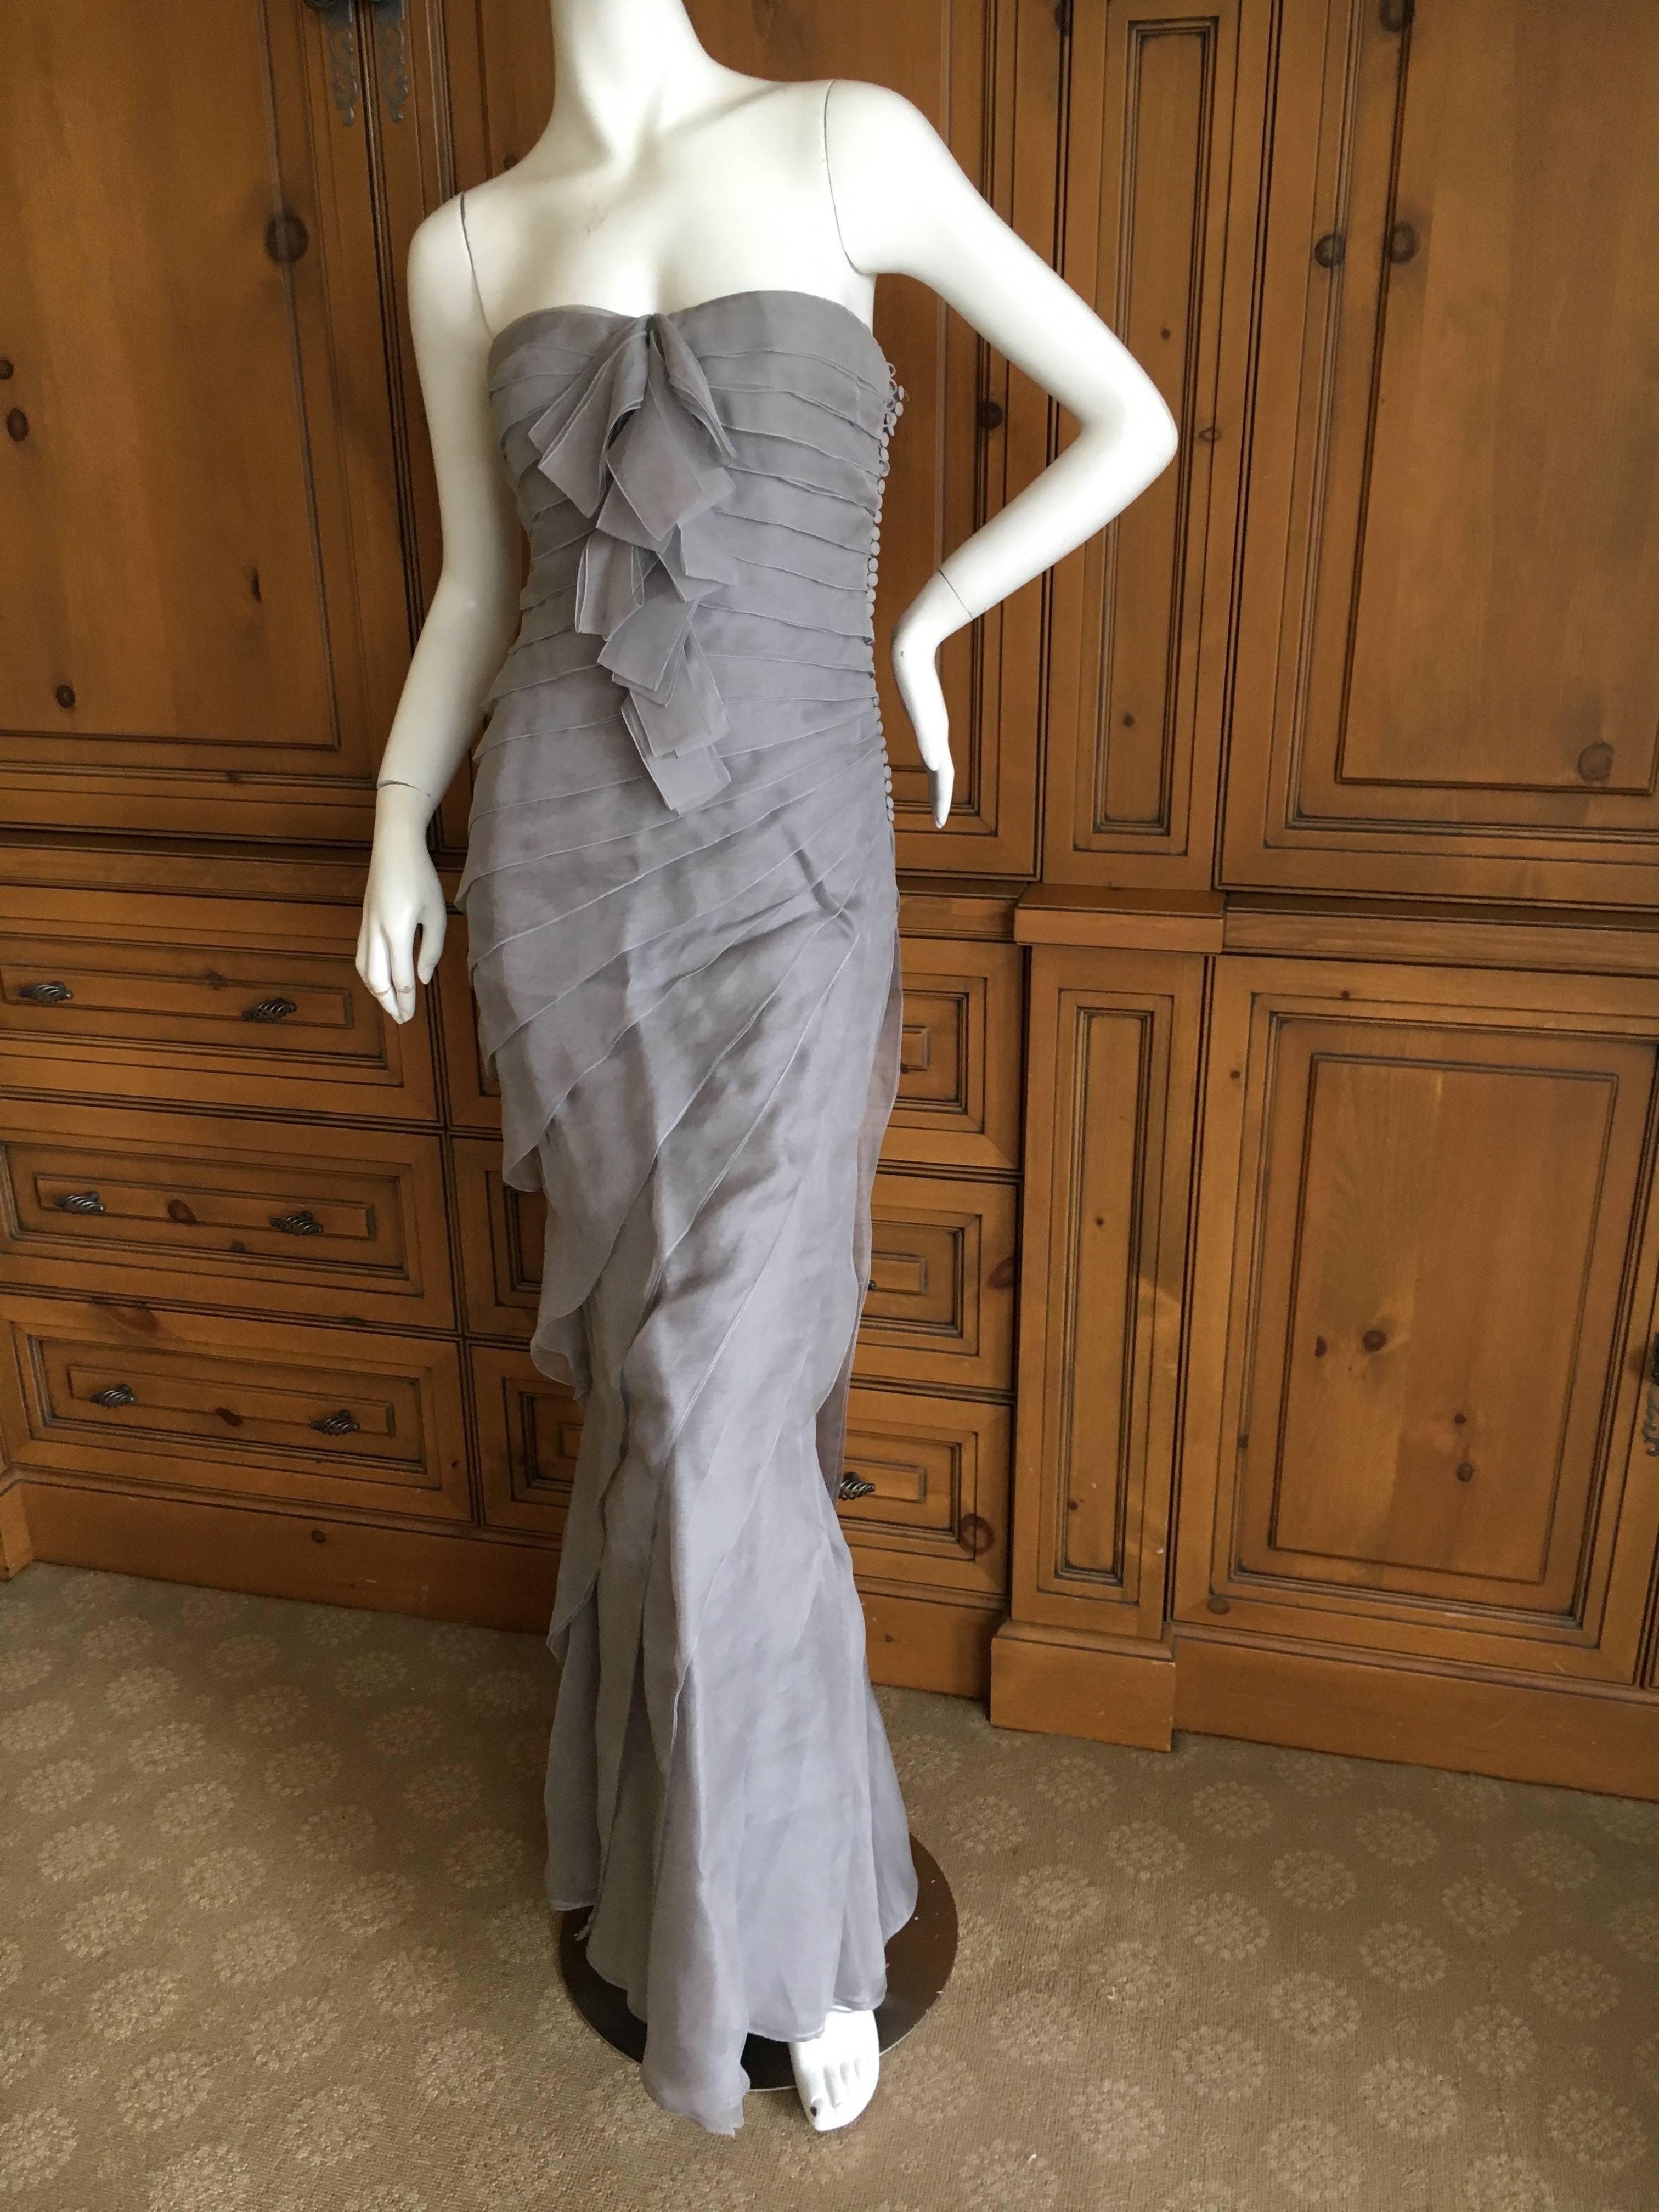  Dior by John Galliano Strapless Gray Silk Tiered Evening Dress w Inner Corset In Excellent Condition For Sale In Cloverdale, CA